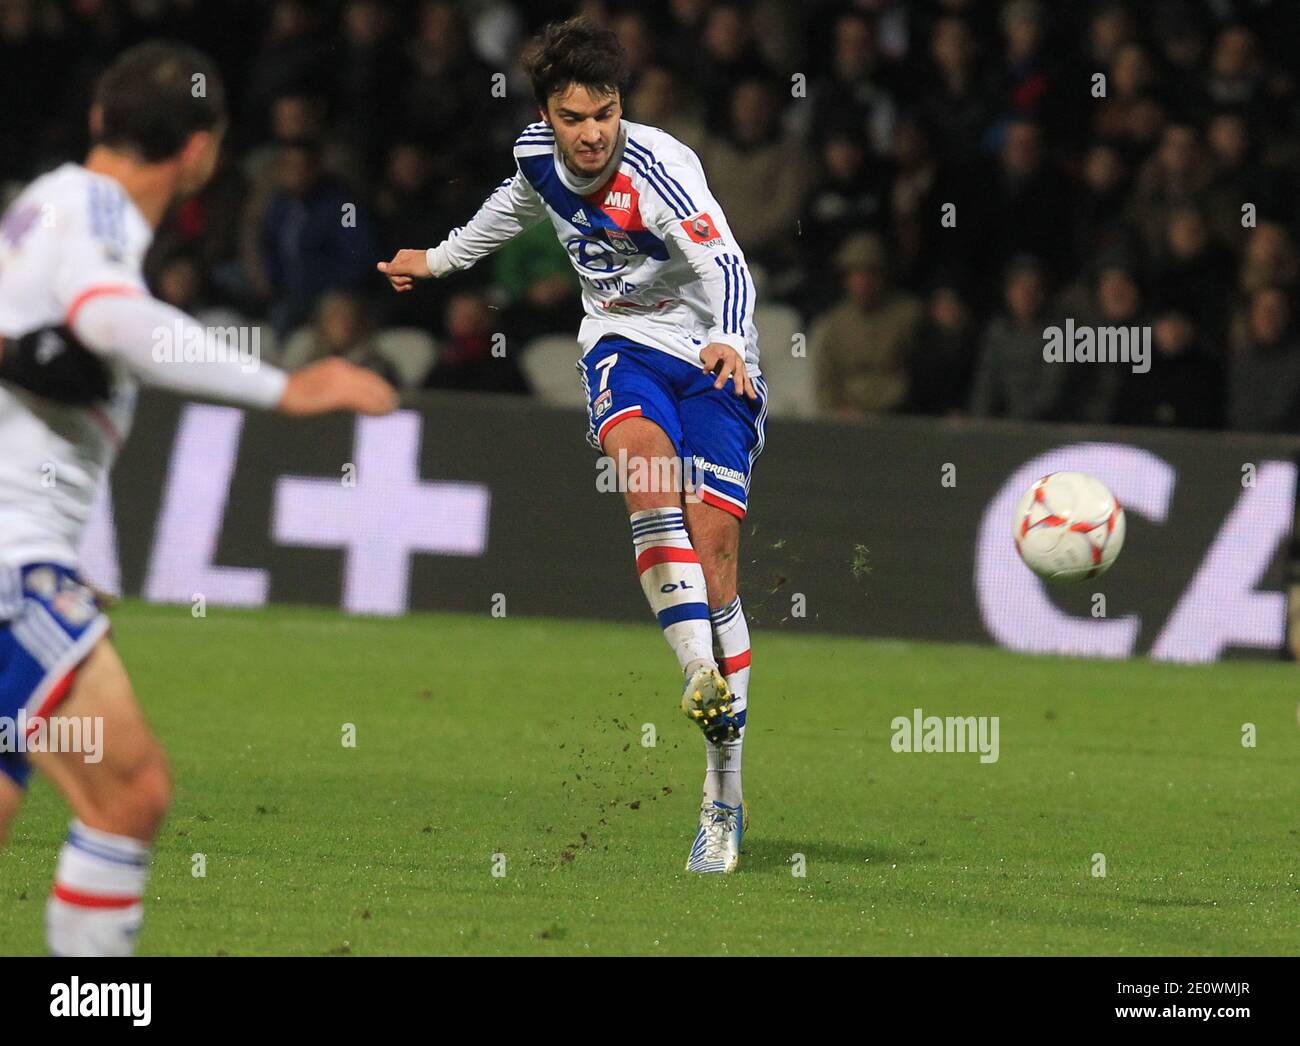 OL's Clement Grenier during the French First League soccer match, Olympique Lyonnais Vs Montpellier at Geralnd stadium in Lyon, France, on December 1, 2012. Lyon won 1-0. Photo by Vincent Dargent/ABACAPRESS.COM Stock Photo